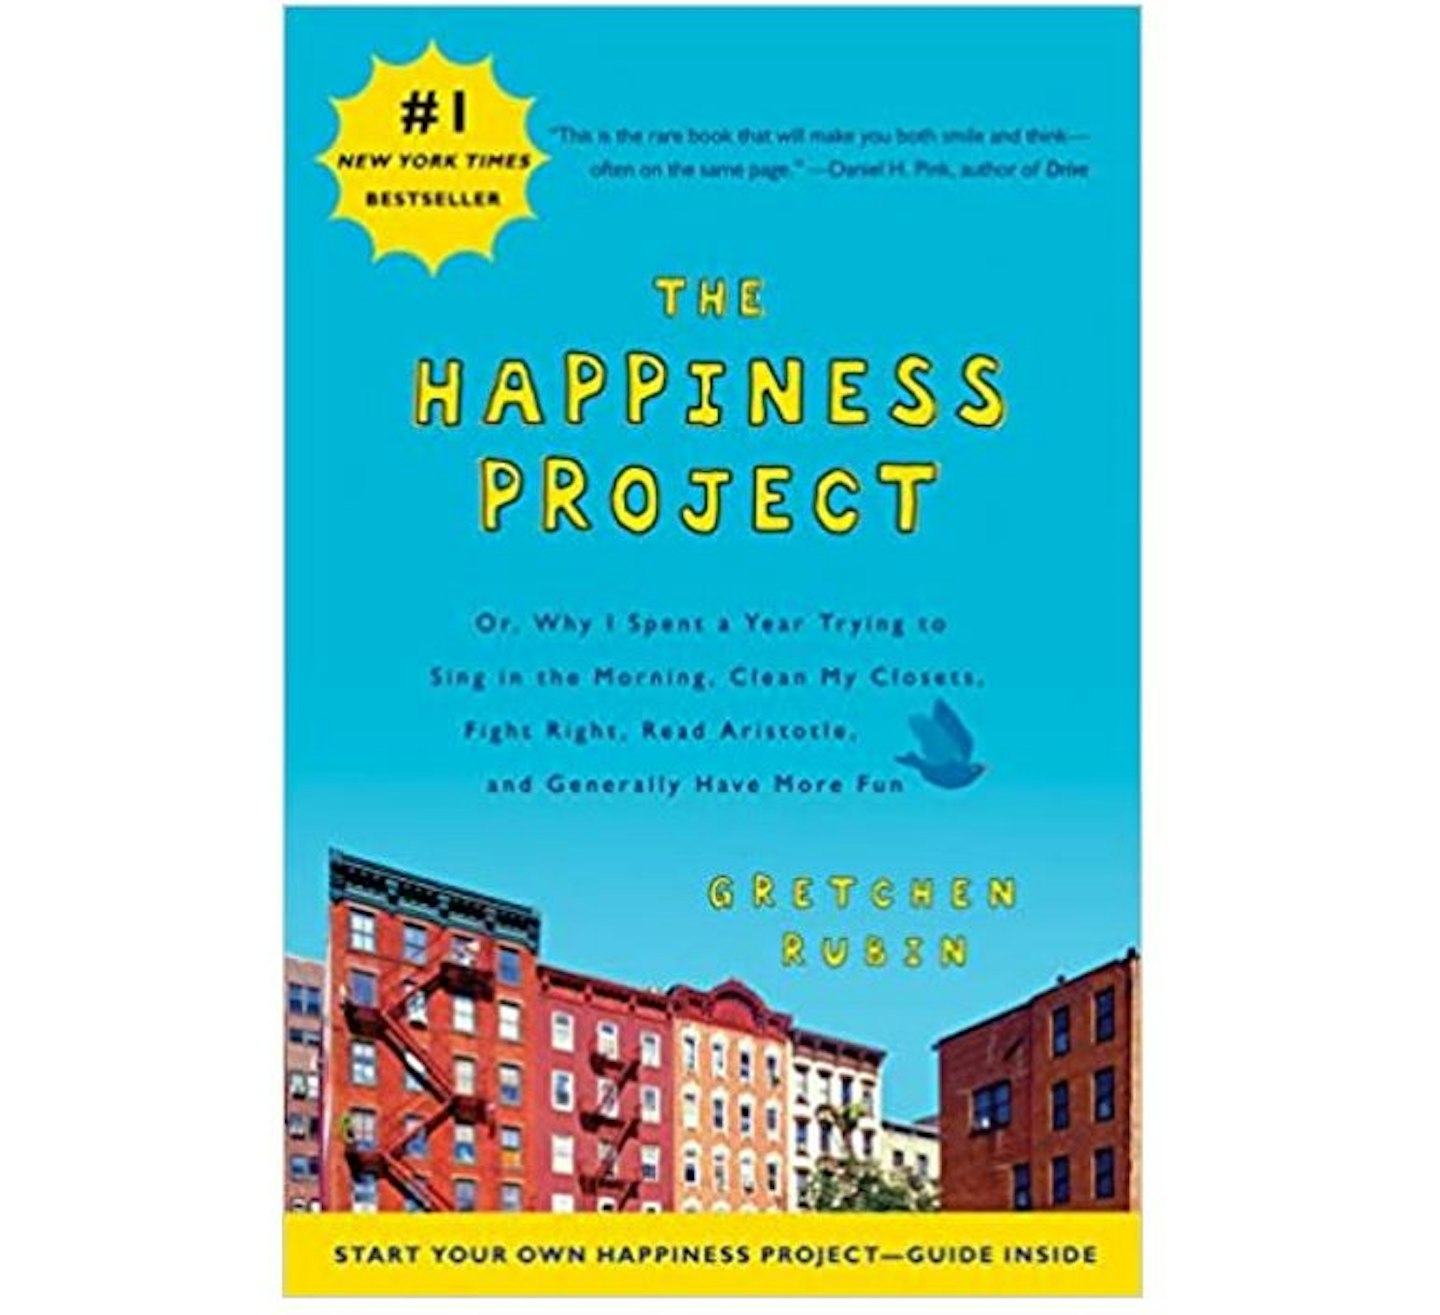 The Happiness Project by Gretchin Rubin